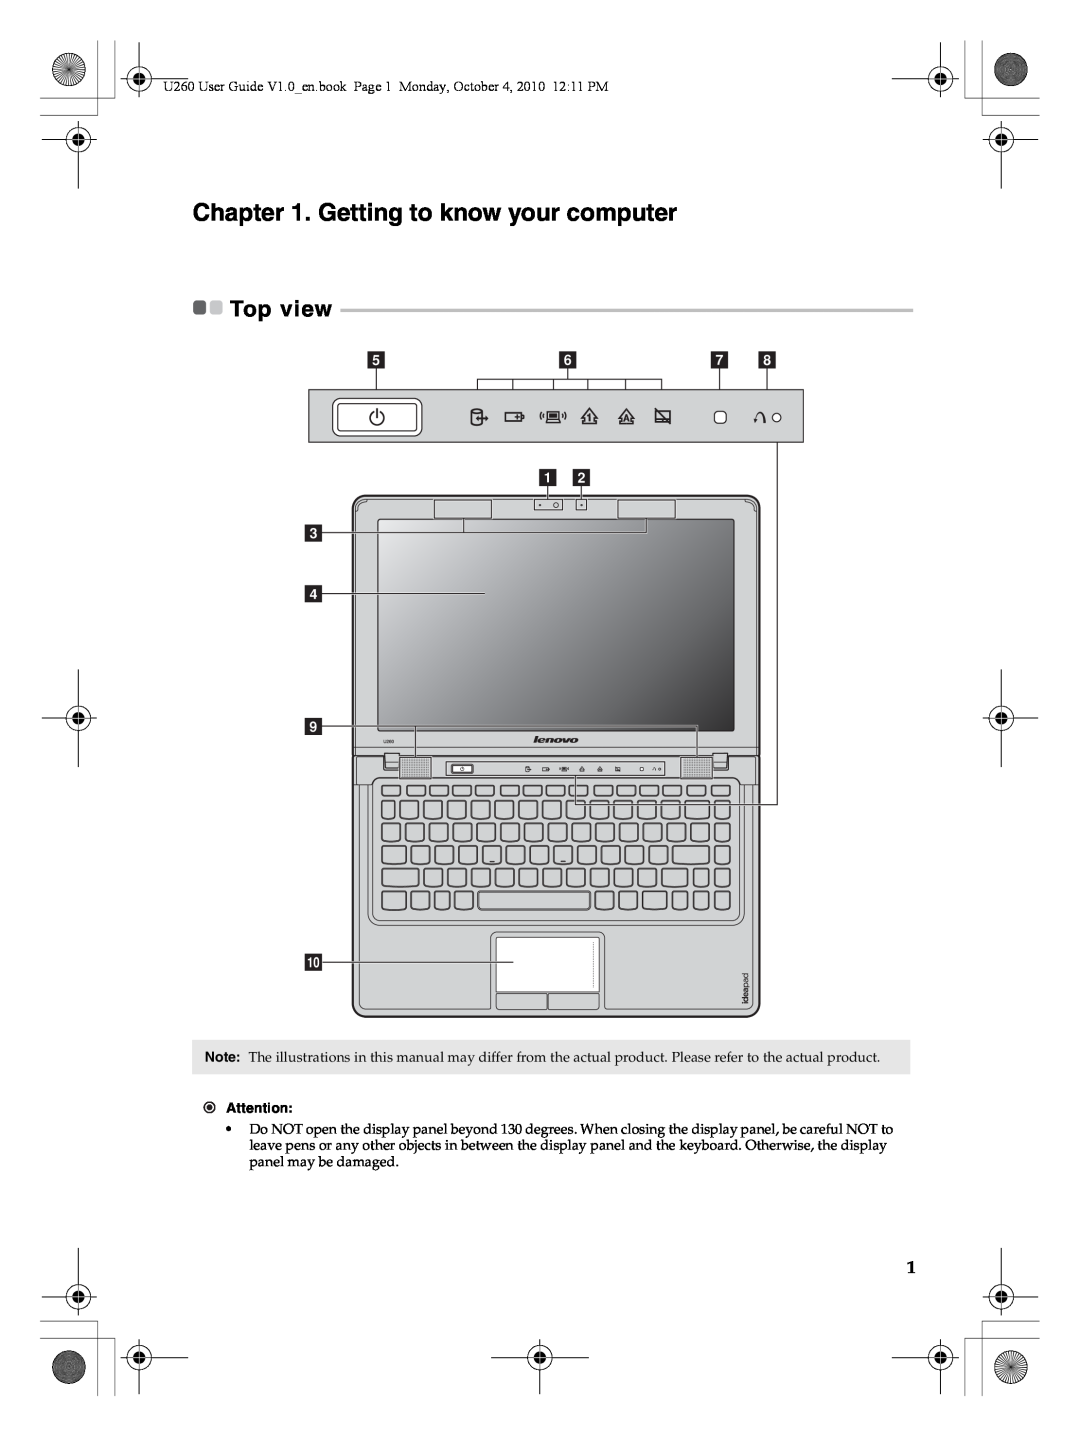 Lenovo U260 manual Getting to know your computer, Top view 